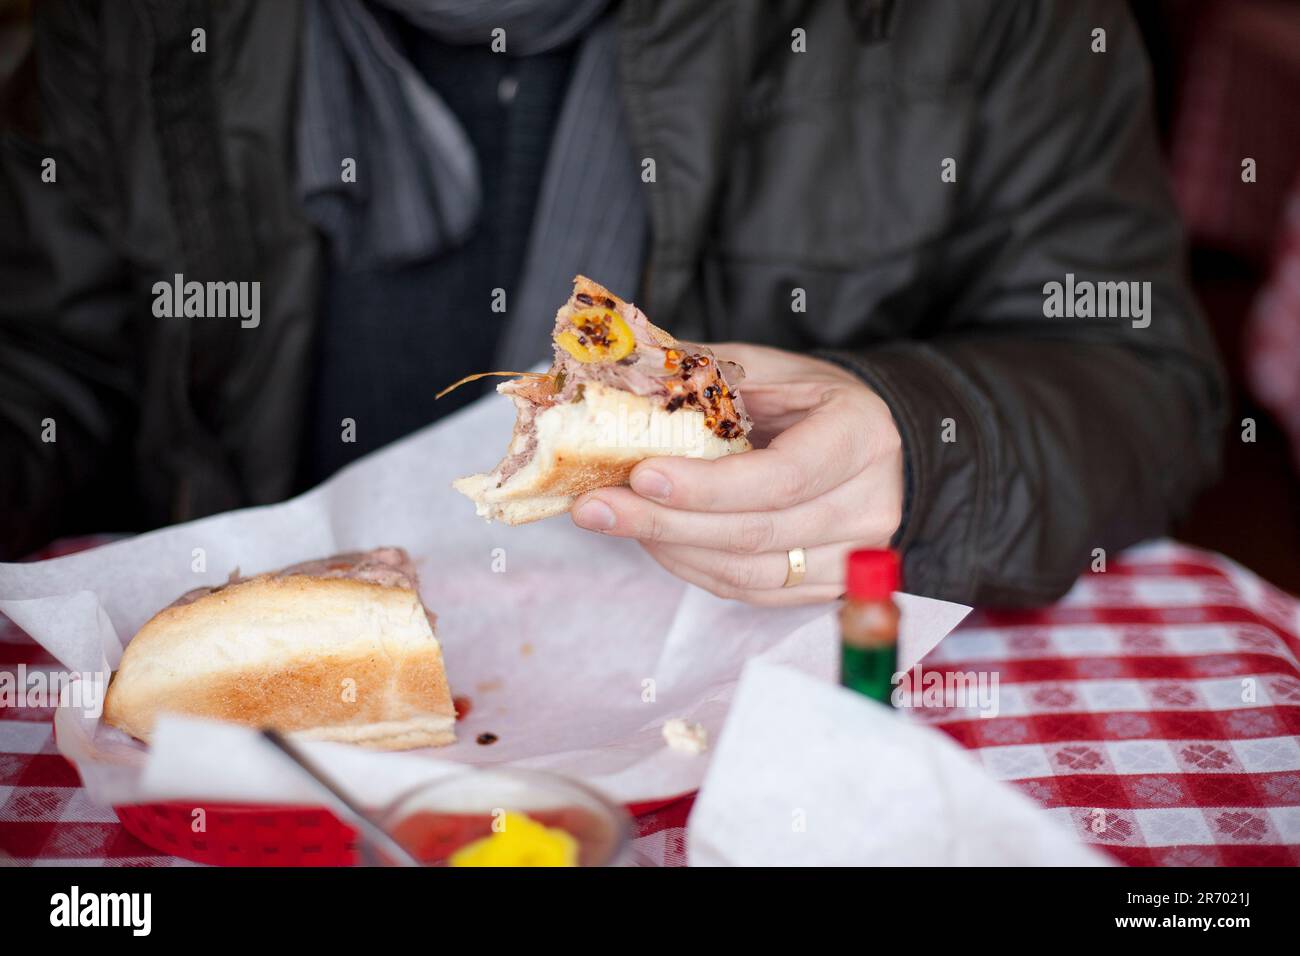 A man holds a half-eaten sandwich of thinly sliced Italian meats and hot peppers at a deli in Burien, Washington. Stock Photo